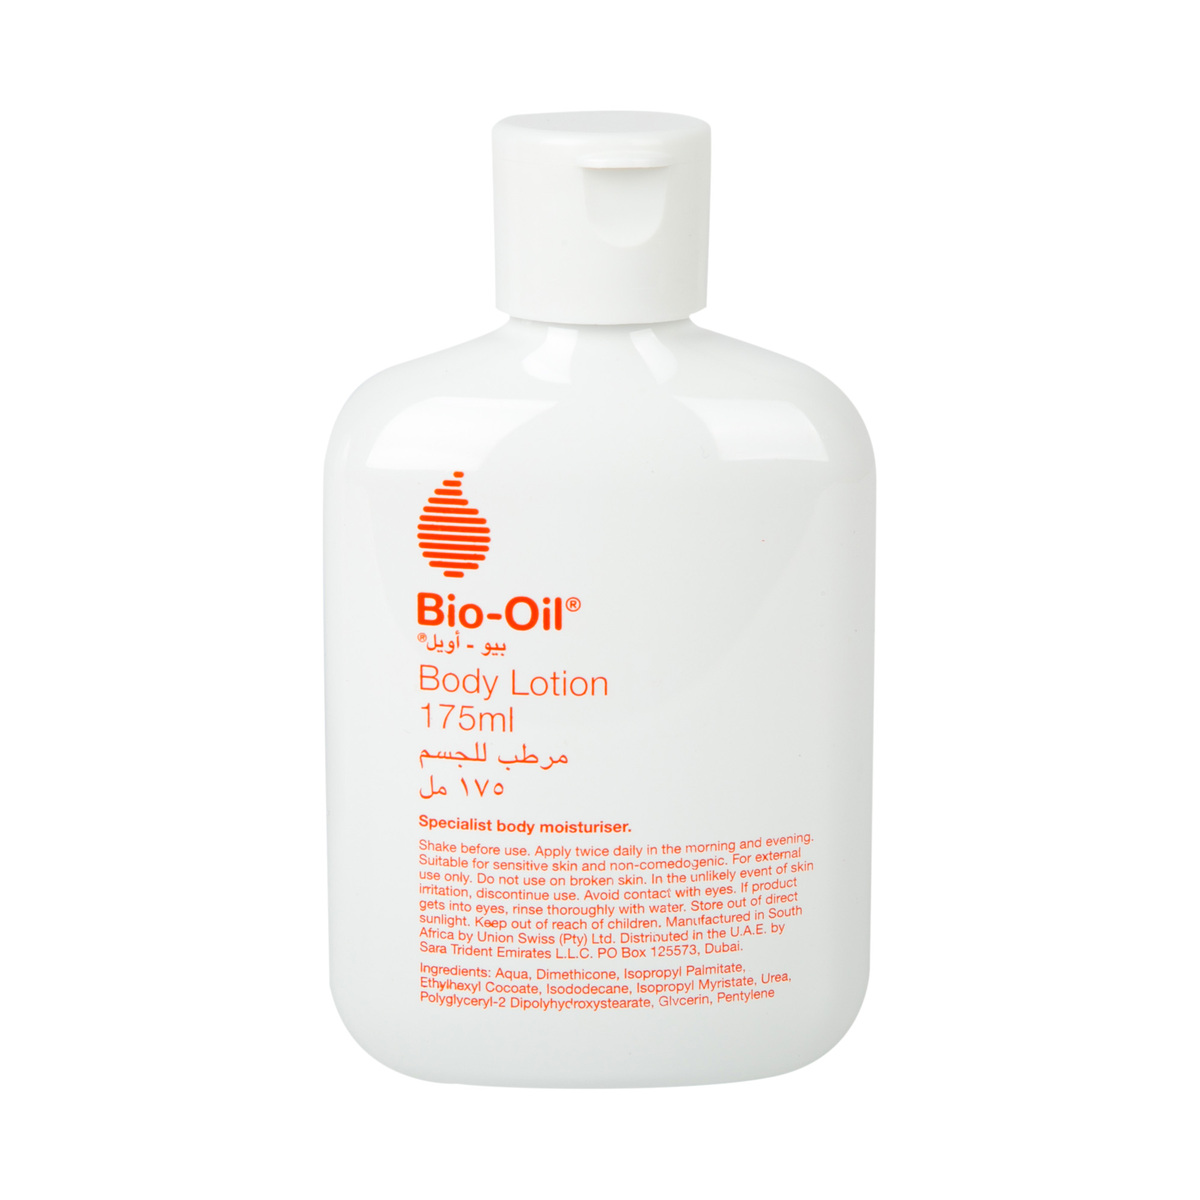 BIO OPIL BODY LOTION 175ML product available at family pharmacy online buy now at qatar doha